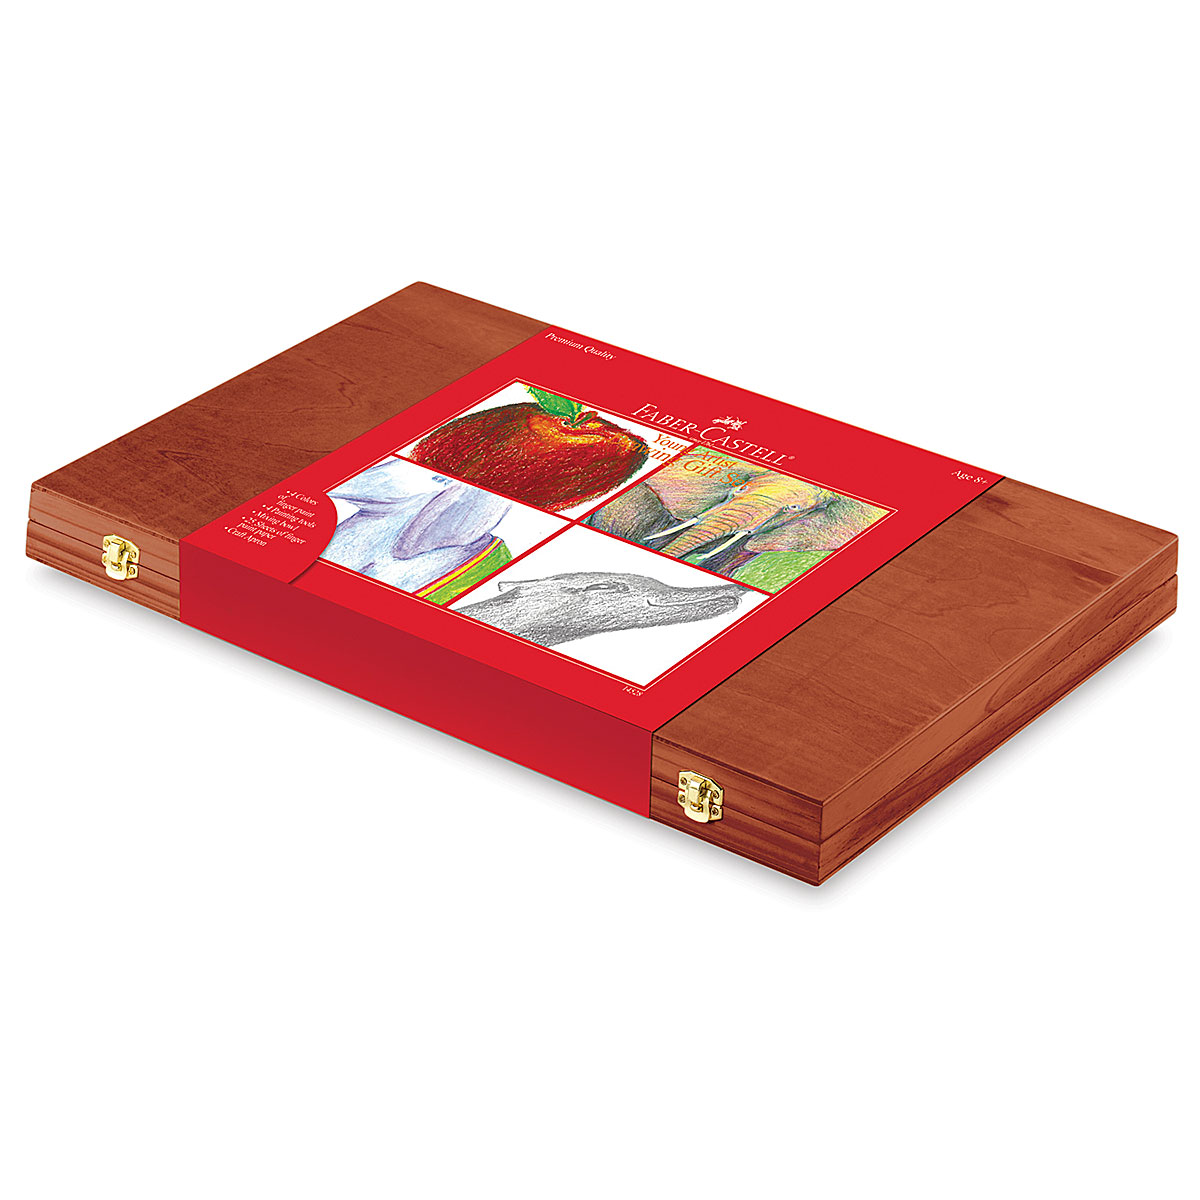 Faber-Castell Young Artists' Essentials Gift Set